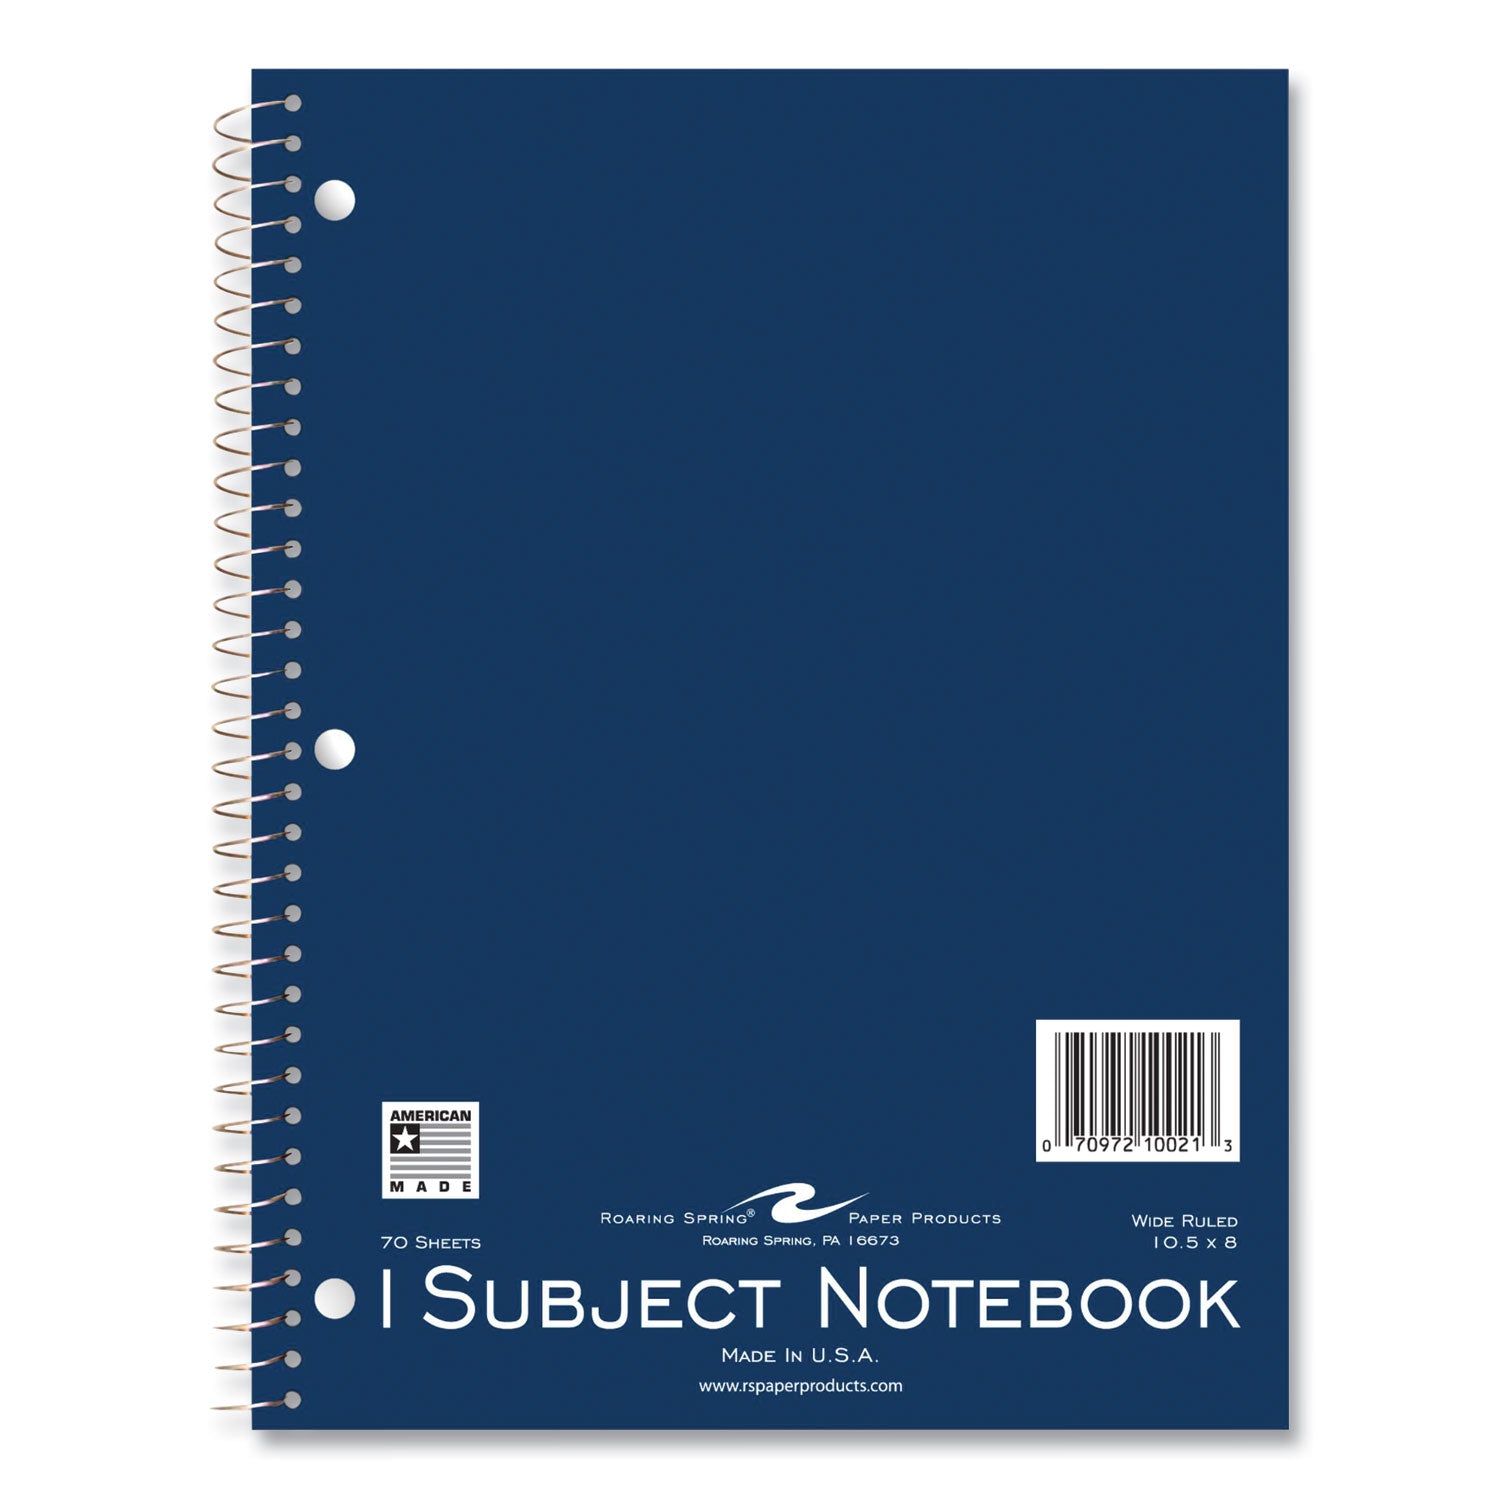 subject-wirebound-promo-notebook-1-subject-wide-legal-rule-asst-cover-70-105x8-sheets-24-ct-ships-in-4-6-bus-days_roa10021cs - 1